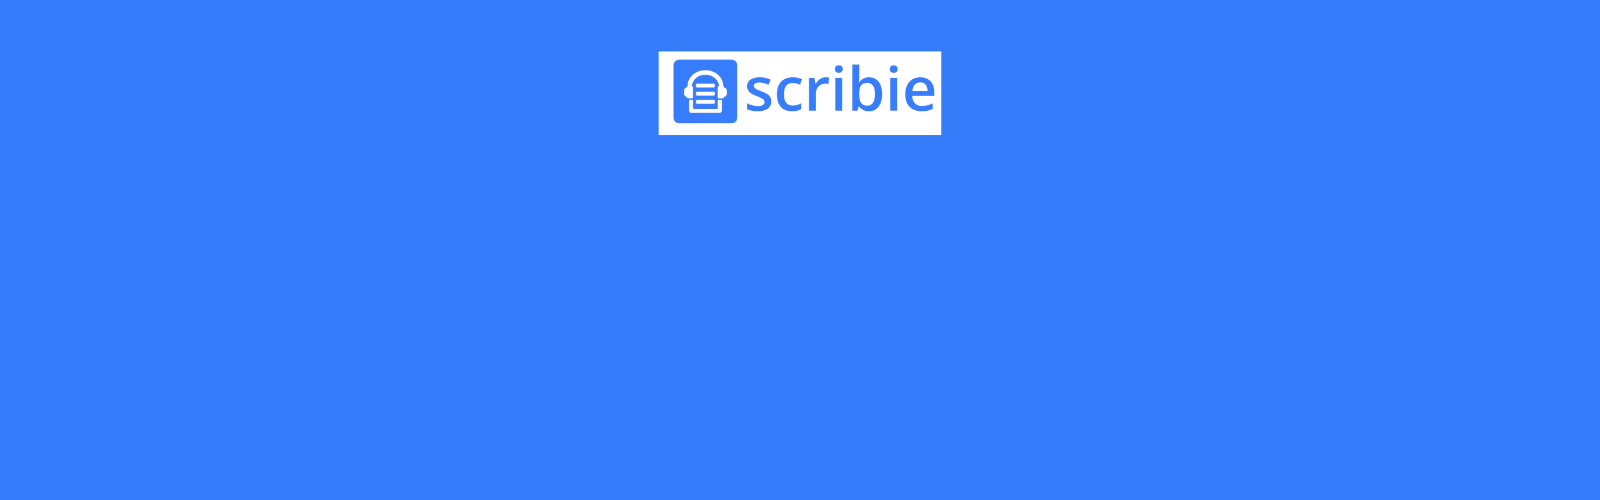 Enhance your transcriptions from Scribie with additional services